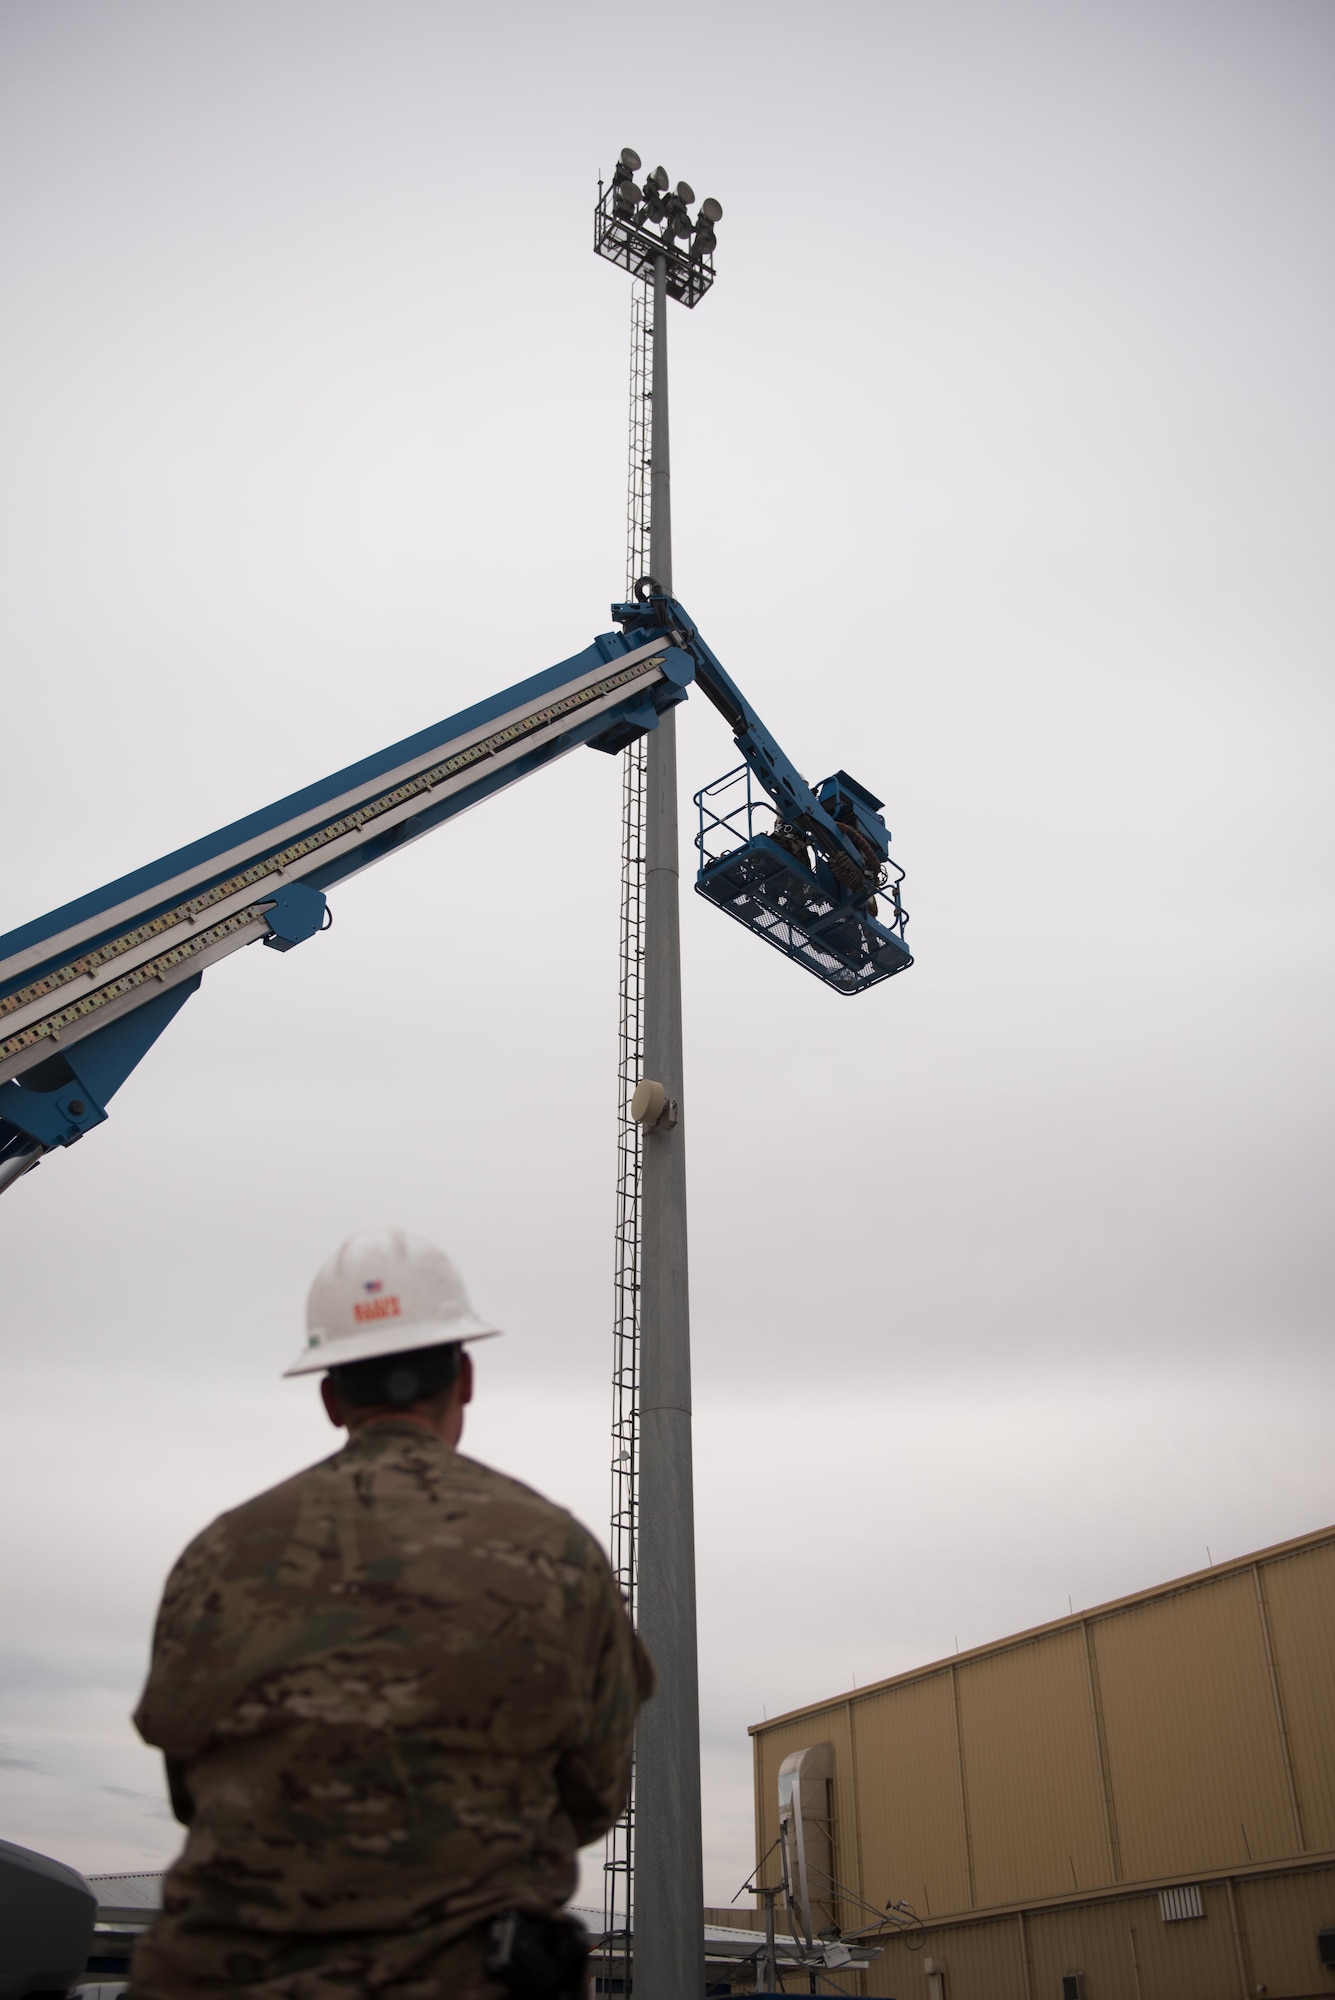 Staff Sgt. Mark Cox, a 455th Expeditionary Civil Engineer Squadron electrical systems craftsman, observes as a boom lift rises at Bagram Airfield, Afghanistan, May 12, 2017. Electrical systems Airmen are responsible for installing, repairing and maintaining electrical networks, ensuring that the primary source of energy for an installation is always available. (U.S. Air Force photo by Staff Sgt. Benjamin Gonsier)